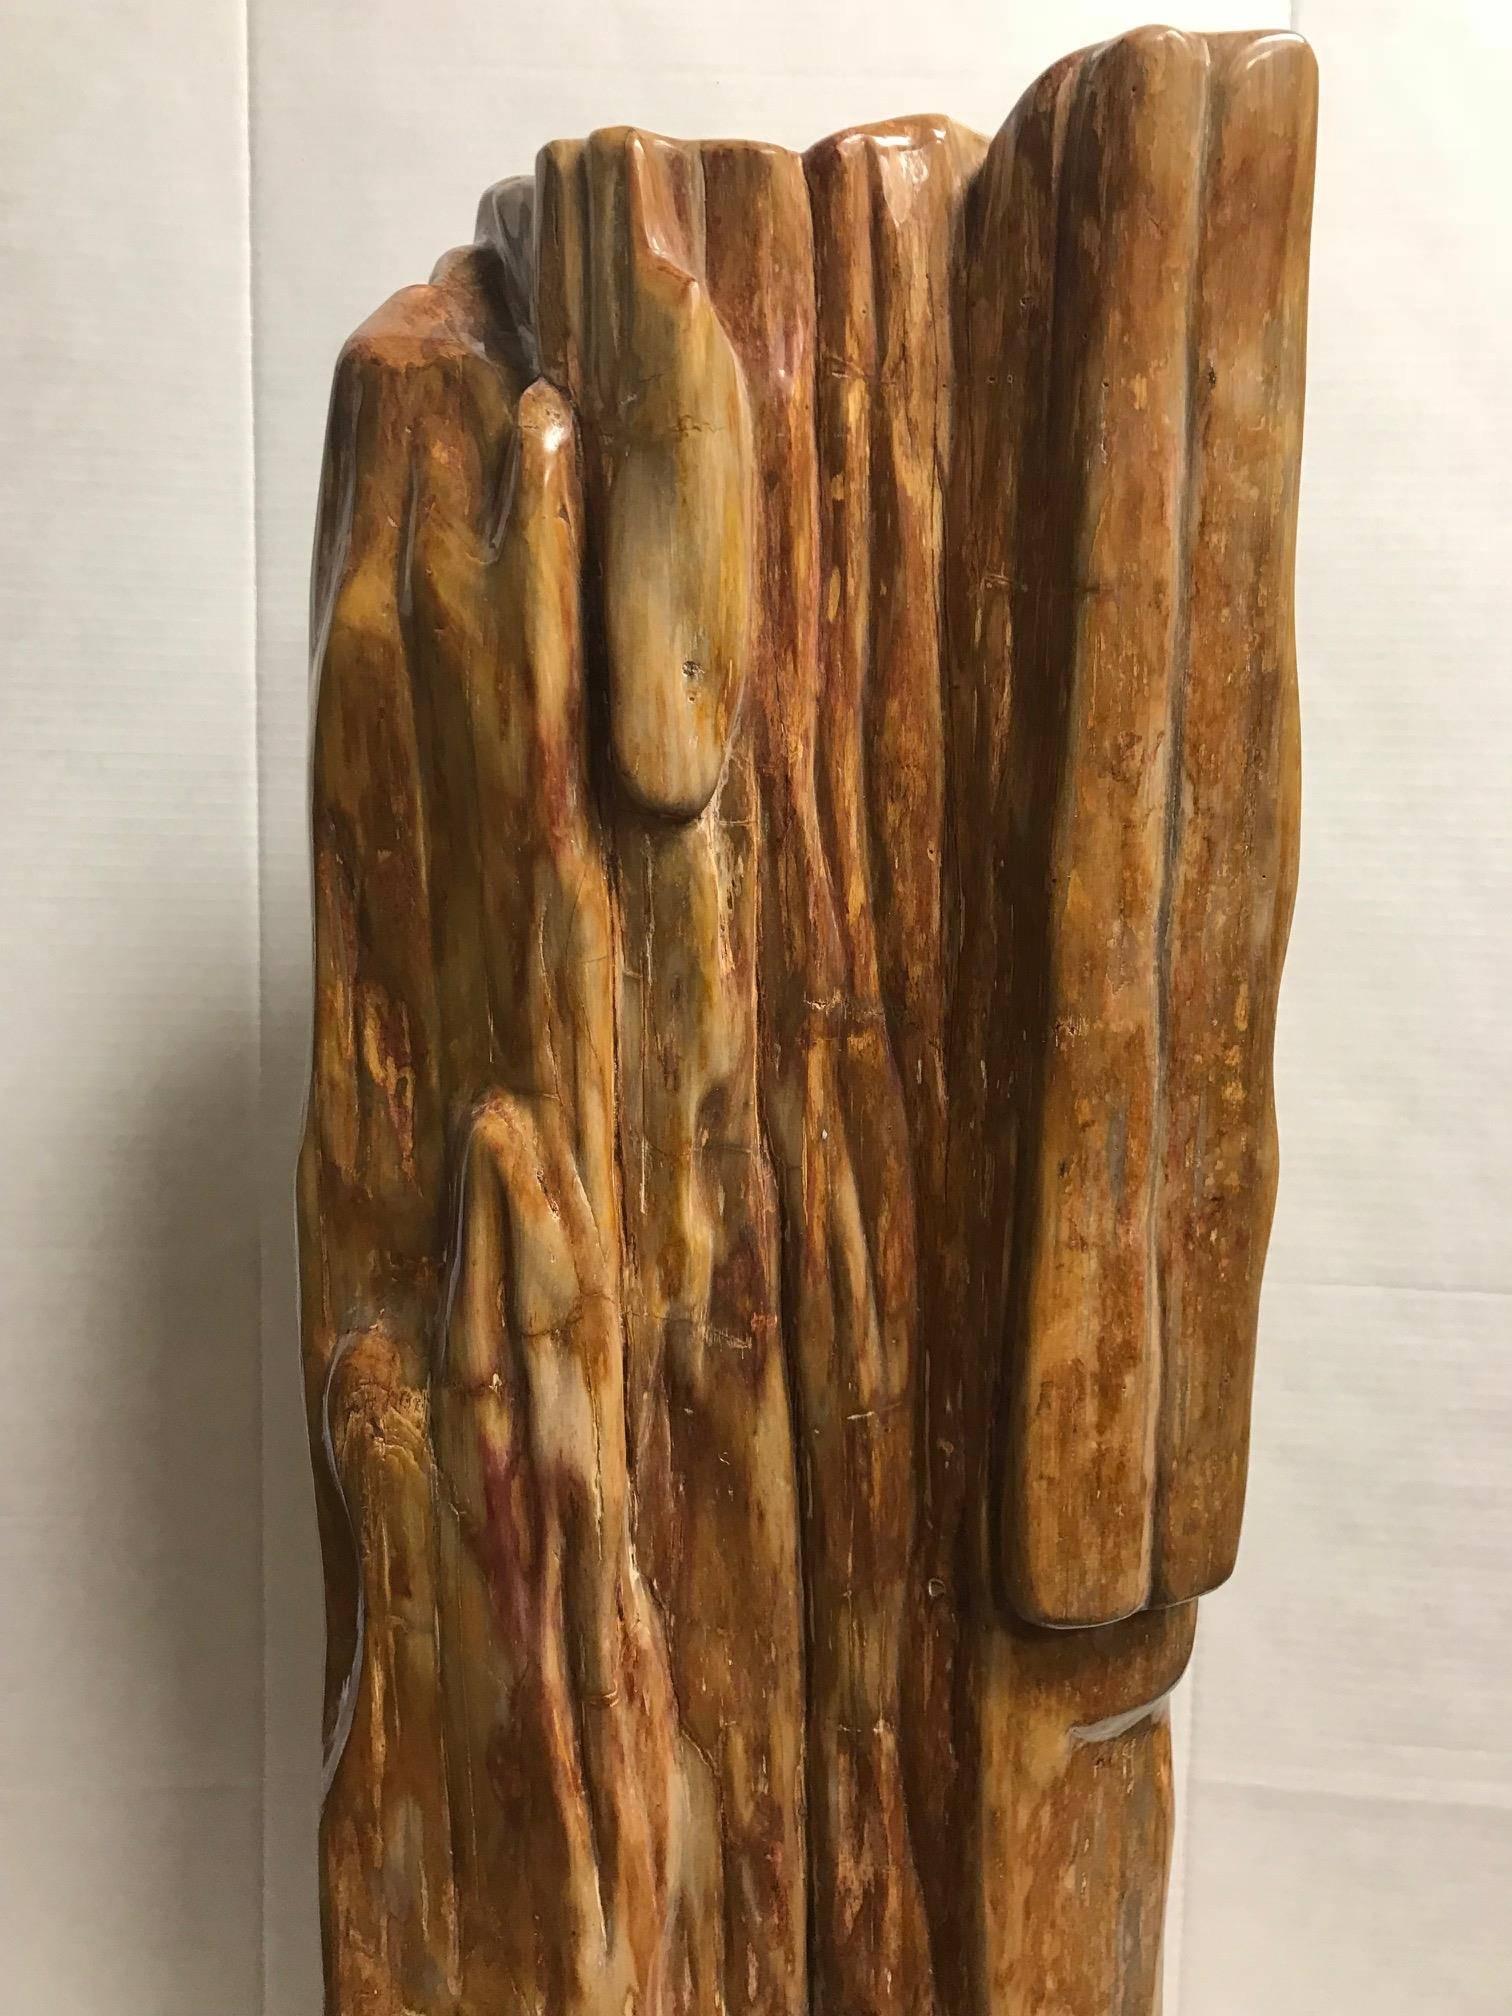 This unique large polished petrified wood specimen is appreciated for it's natural beauty and is extremely versatile. This interesting piece can be used as a wall ornament or decoration.
Over time, the petrified wood becomes so sturdy and dense